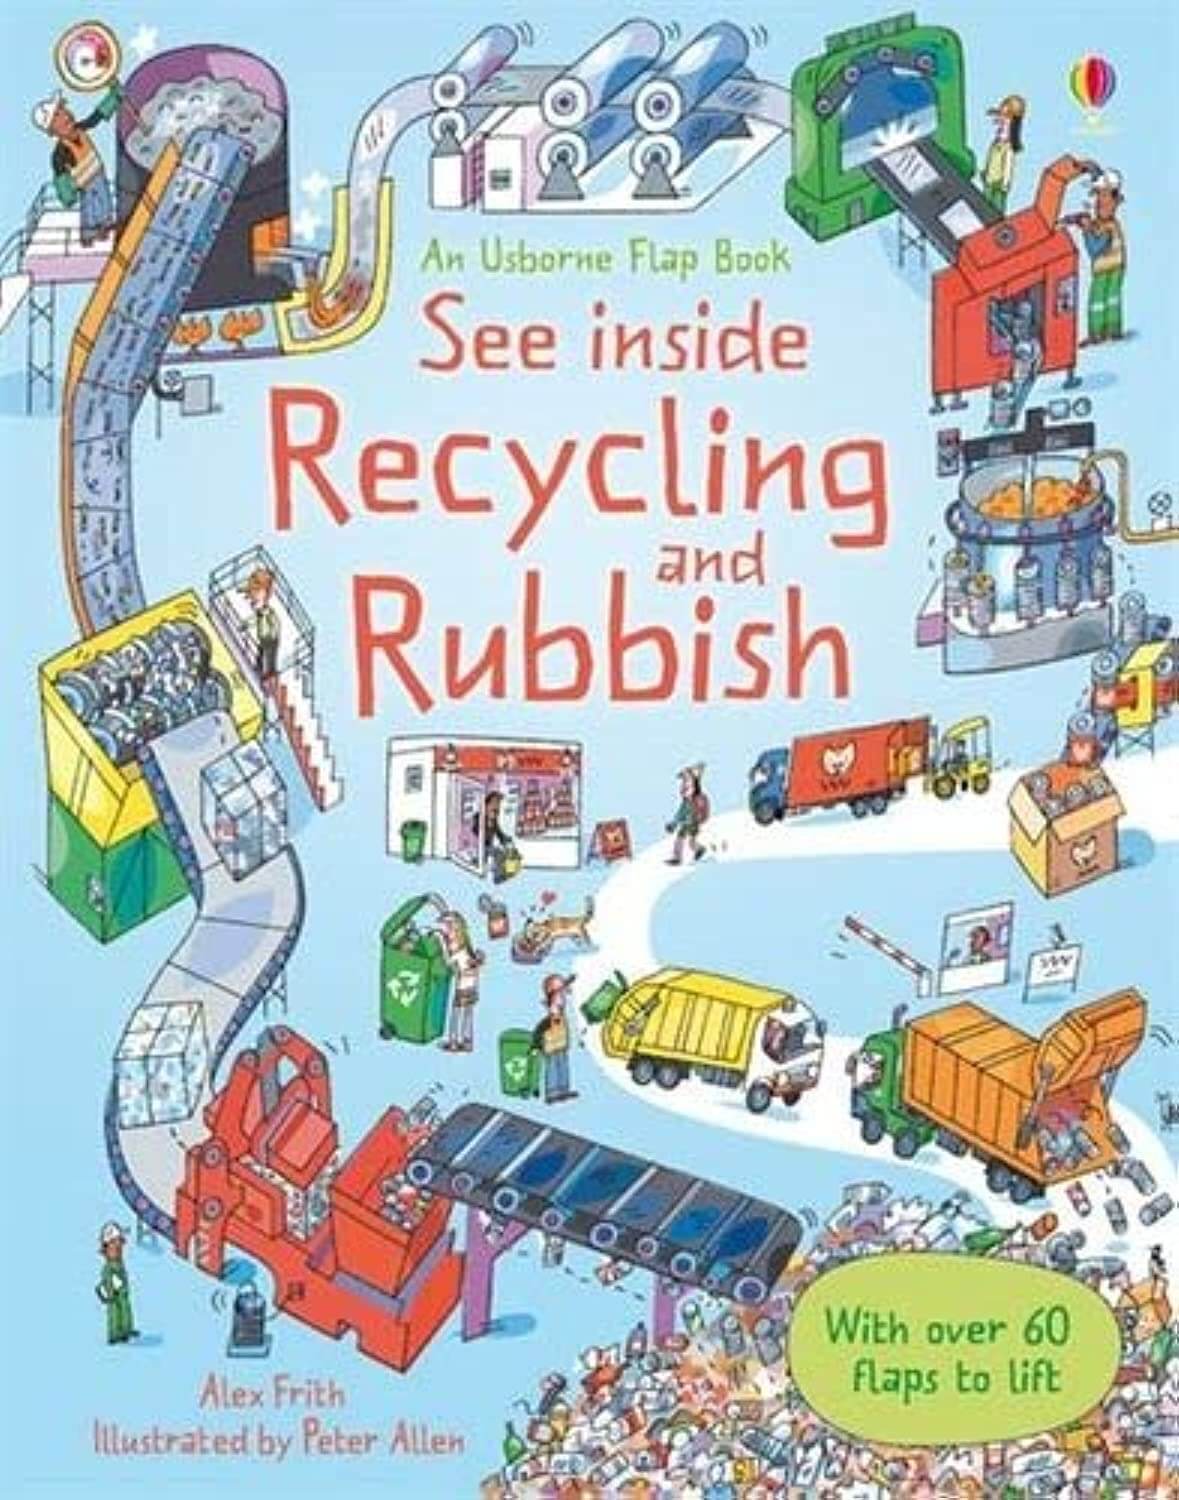 See inside recycling and rubbish by Alex Frith